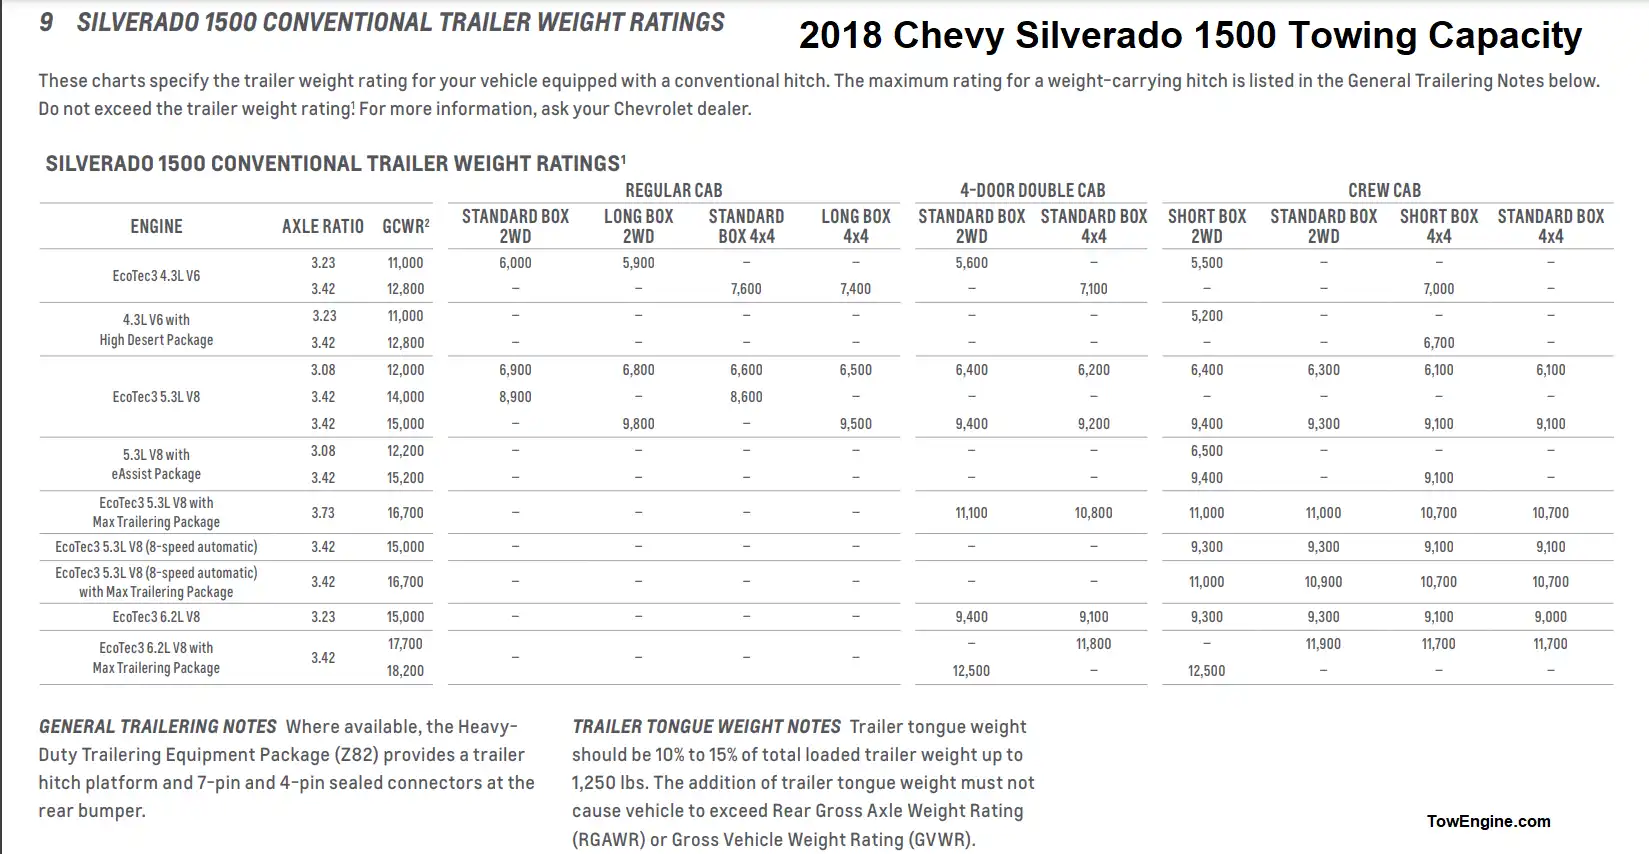 2018 Chevy Chevrolet Silverado 1500 Towing Capacity and Payload Capacity Chart (Conventional Trailer Weight)